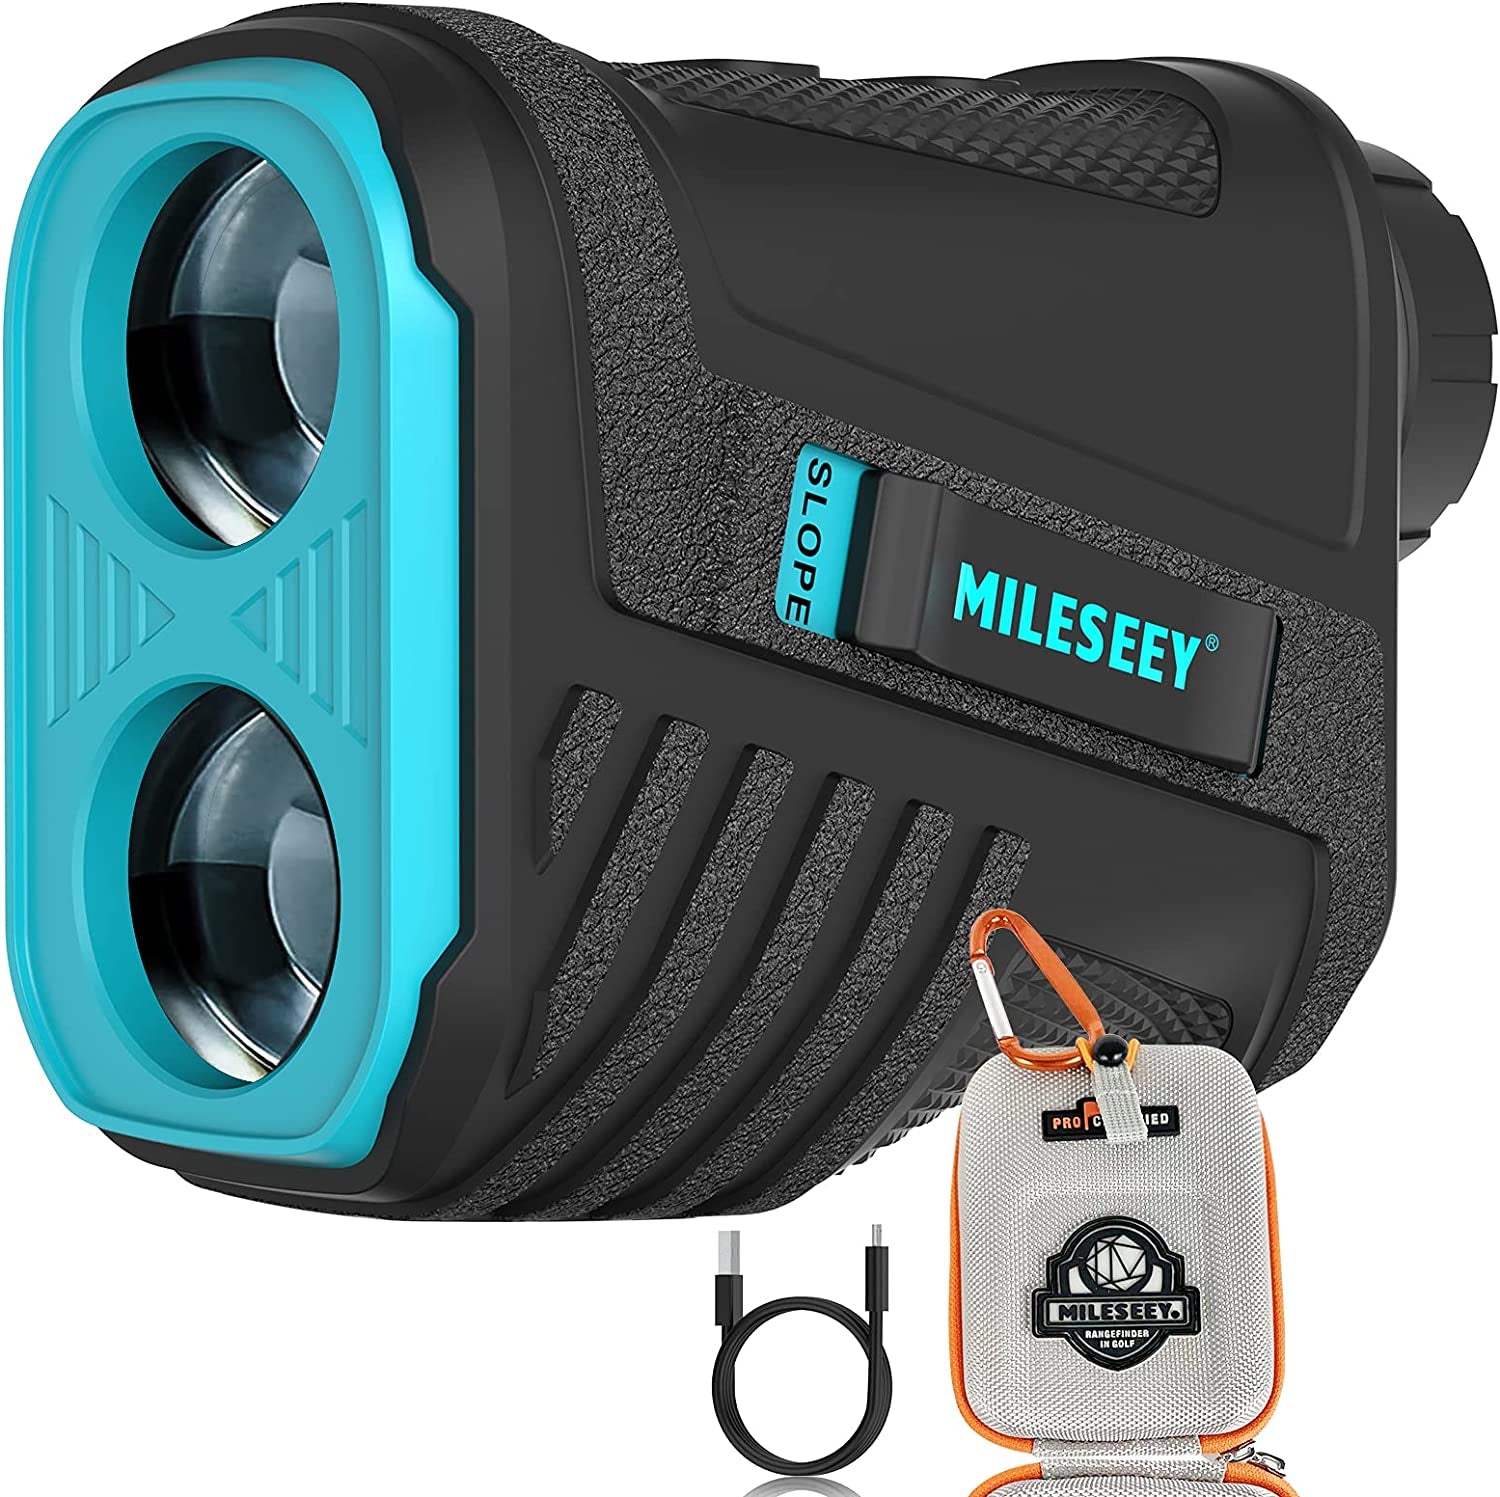 Rechargeable Golf Range Finder with Slope, Mileseey Pf280Pro 656Yard Range Finder with Precise Flag Pole Lock, 6X Magnification, Golf Scanning, Distance/Speed Measurement for Hunting/Golf